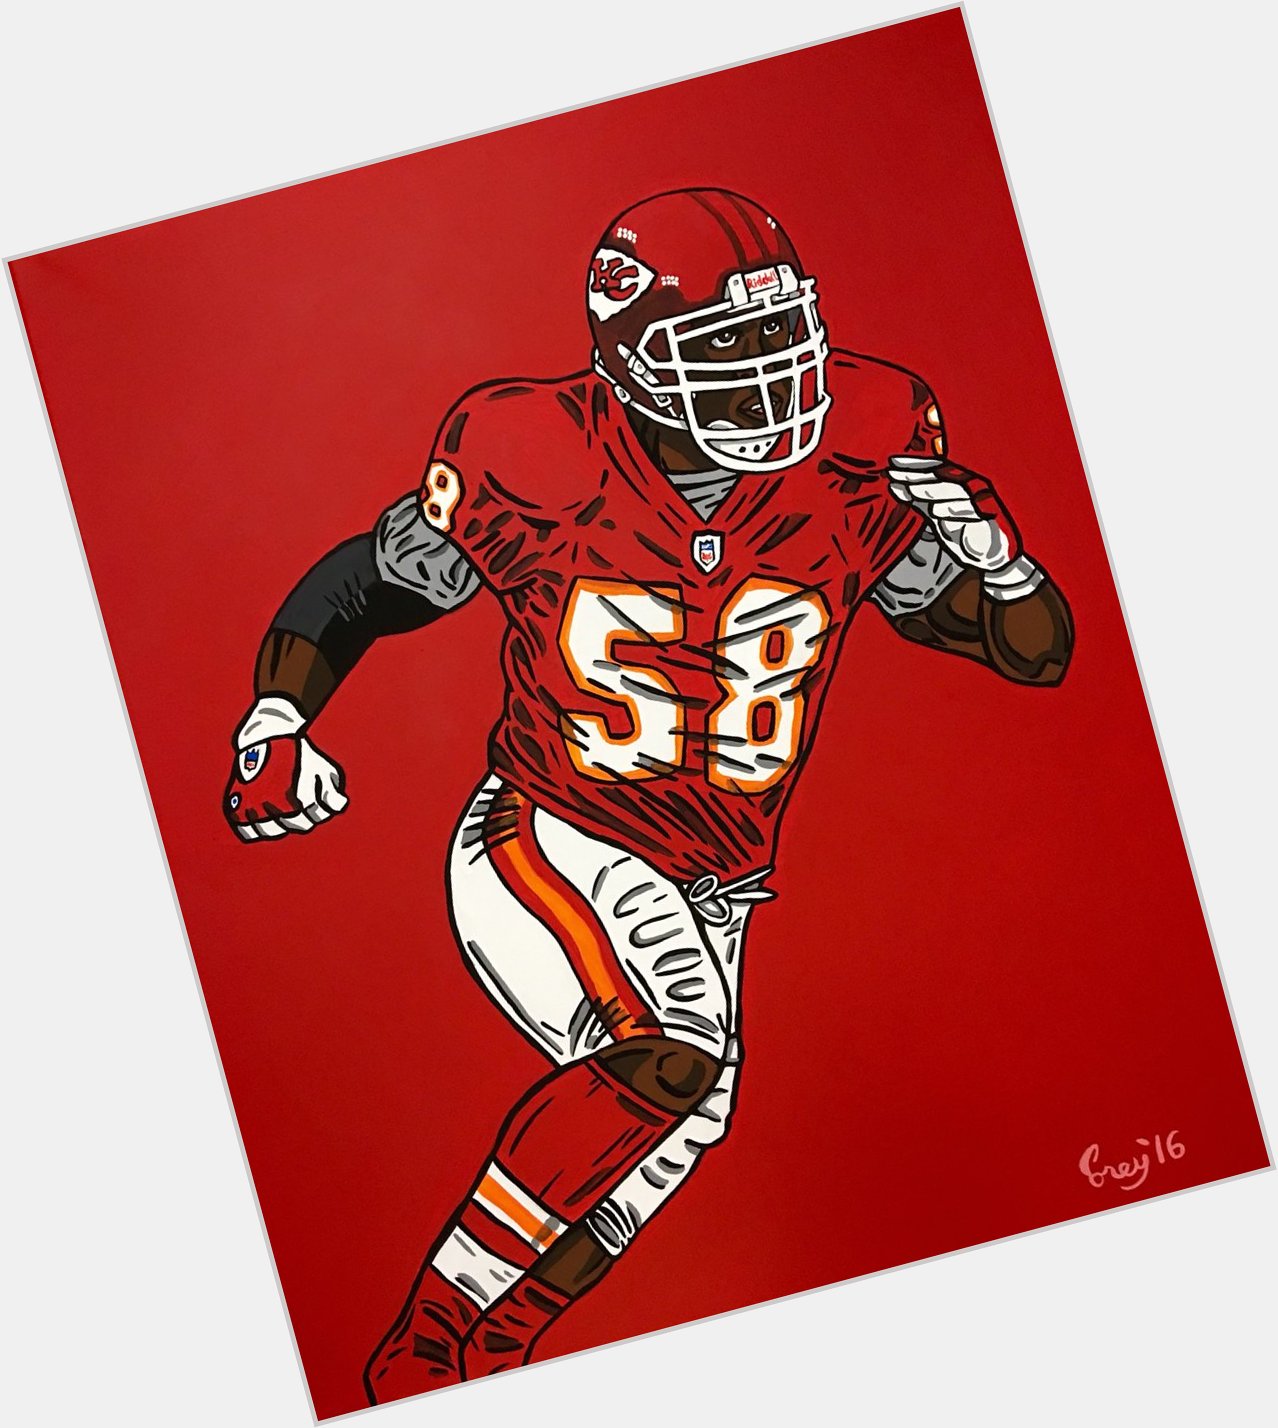 Happy Belated Birthday to the late great Derrick Thomas! 